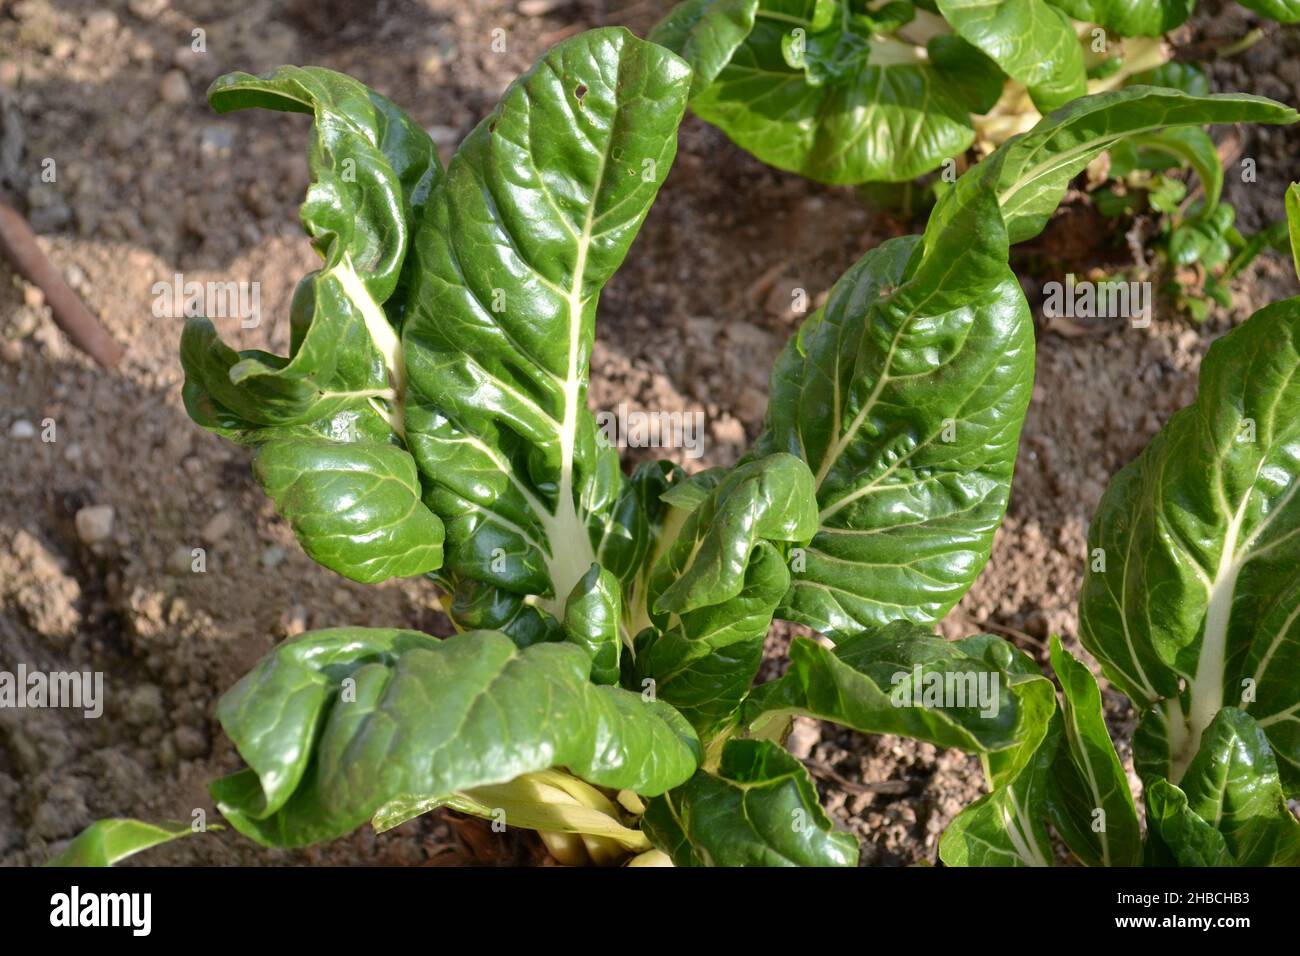 Close-up view of chard plant with large green leaves grown on the ground in agricultural show garden. Stock Photo